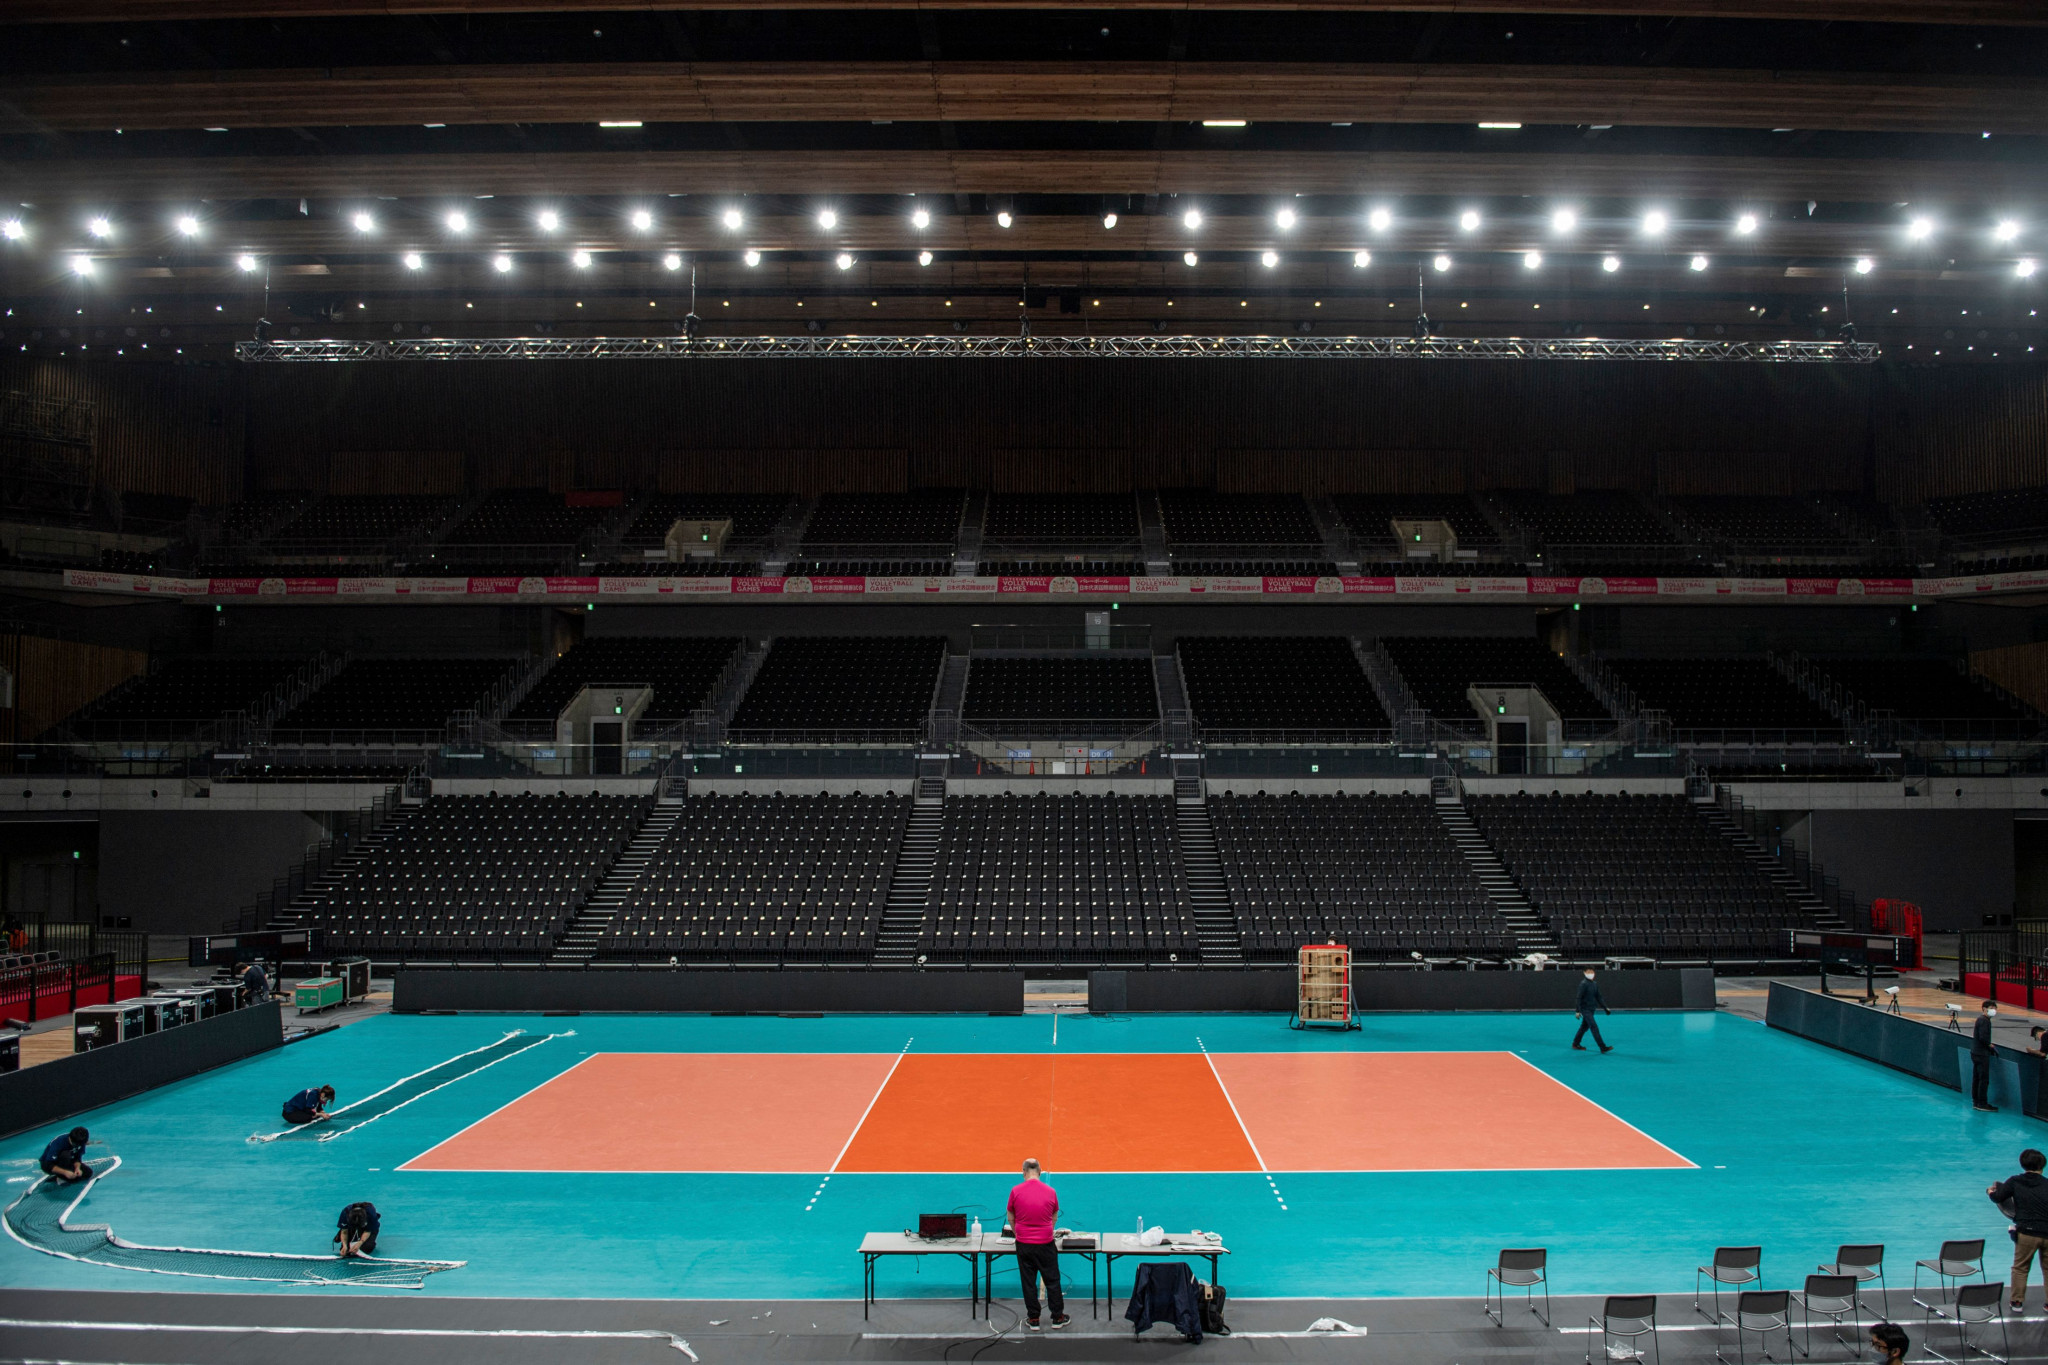 The men's volleyball tournament at Tokyo 2020 begins on July 24, with the women's starting the following day ©Getty Images